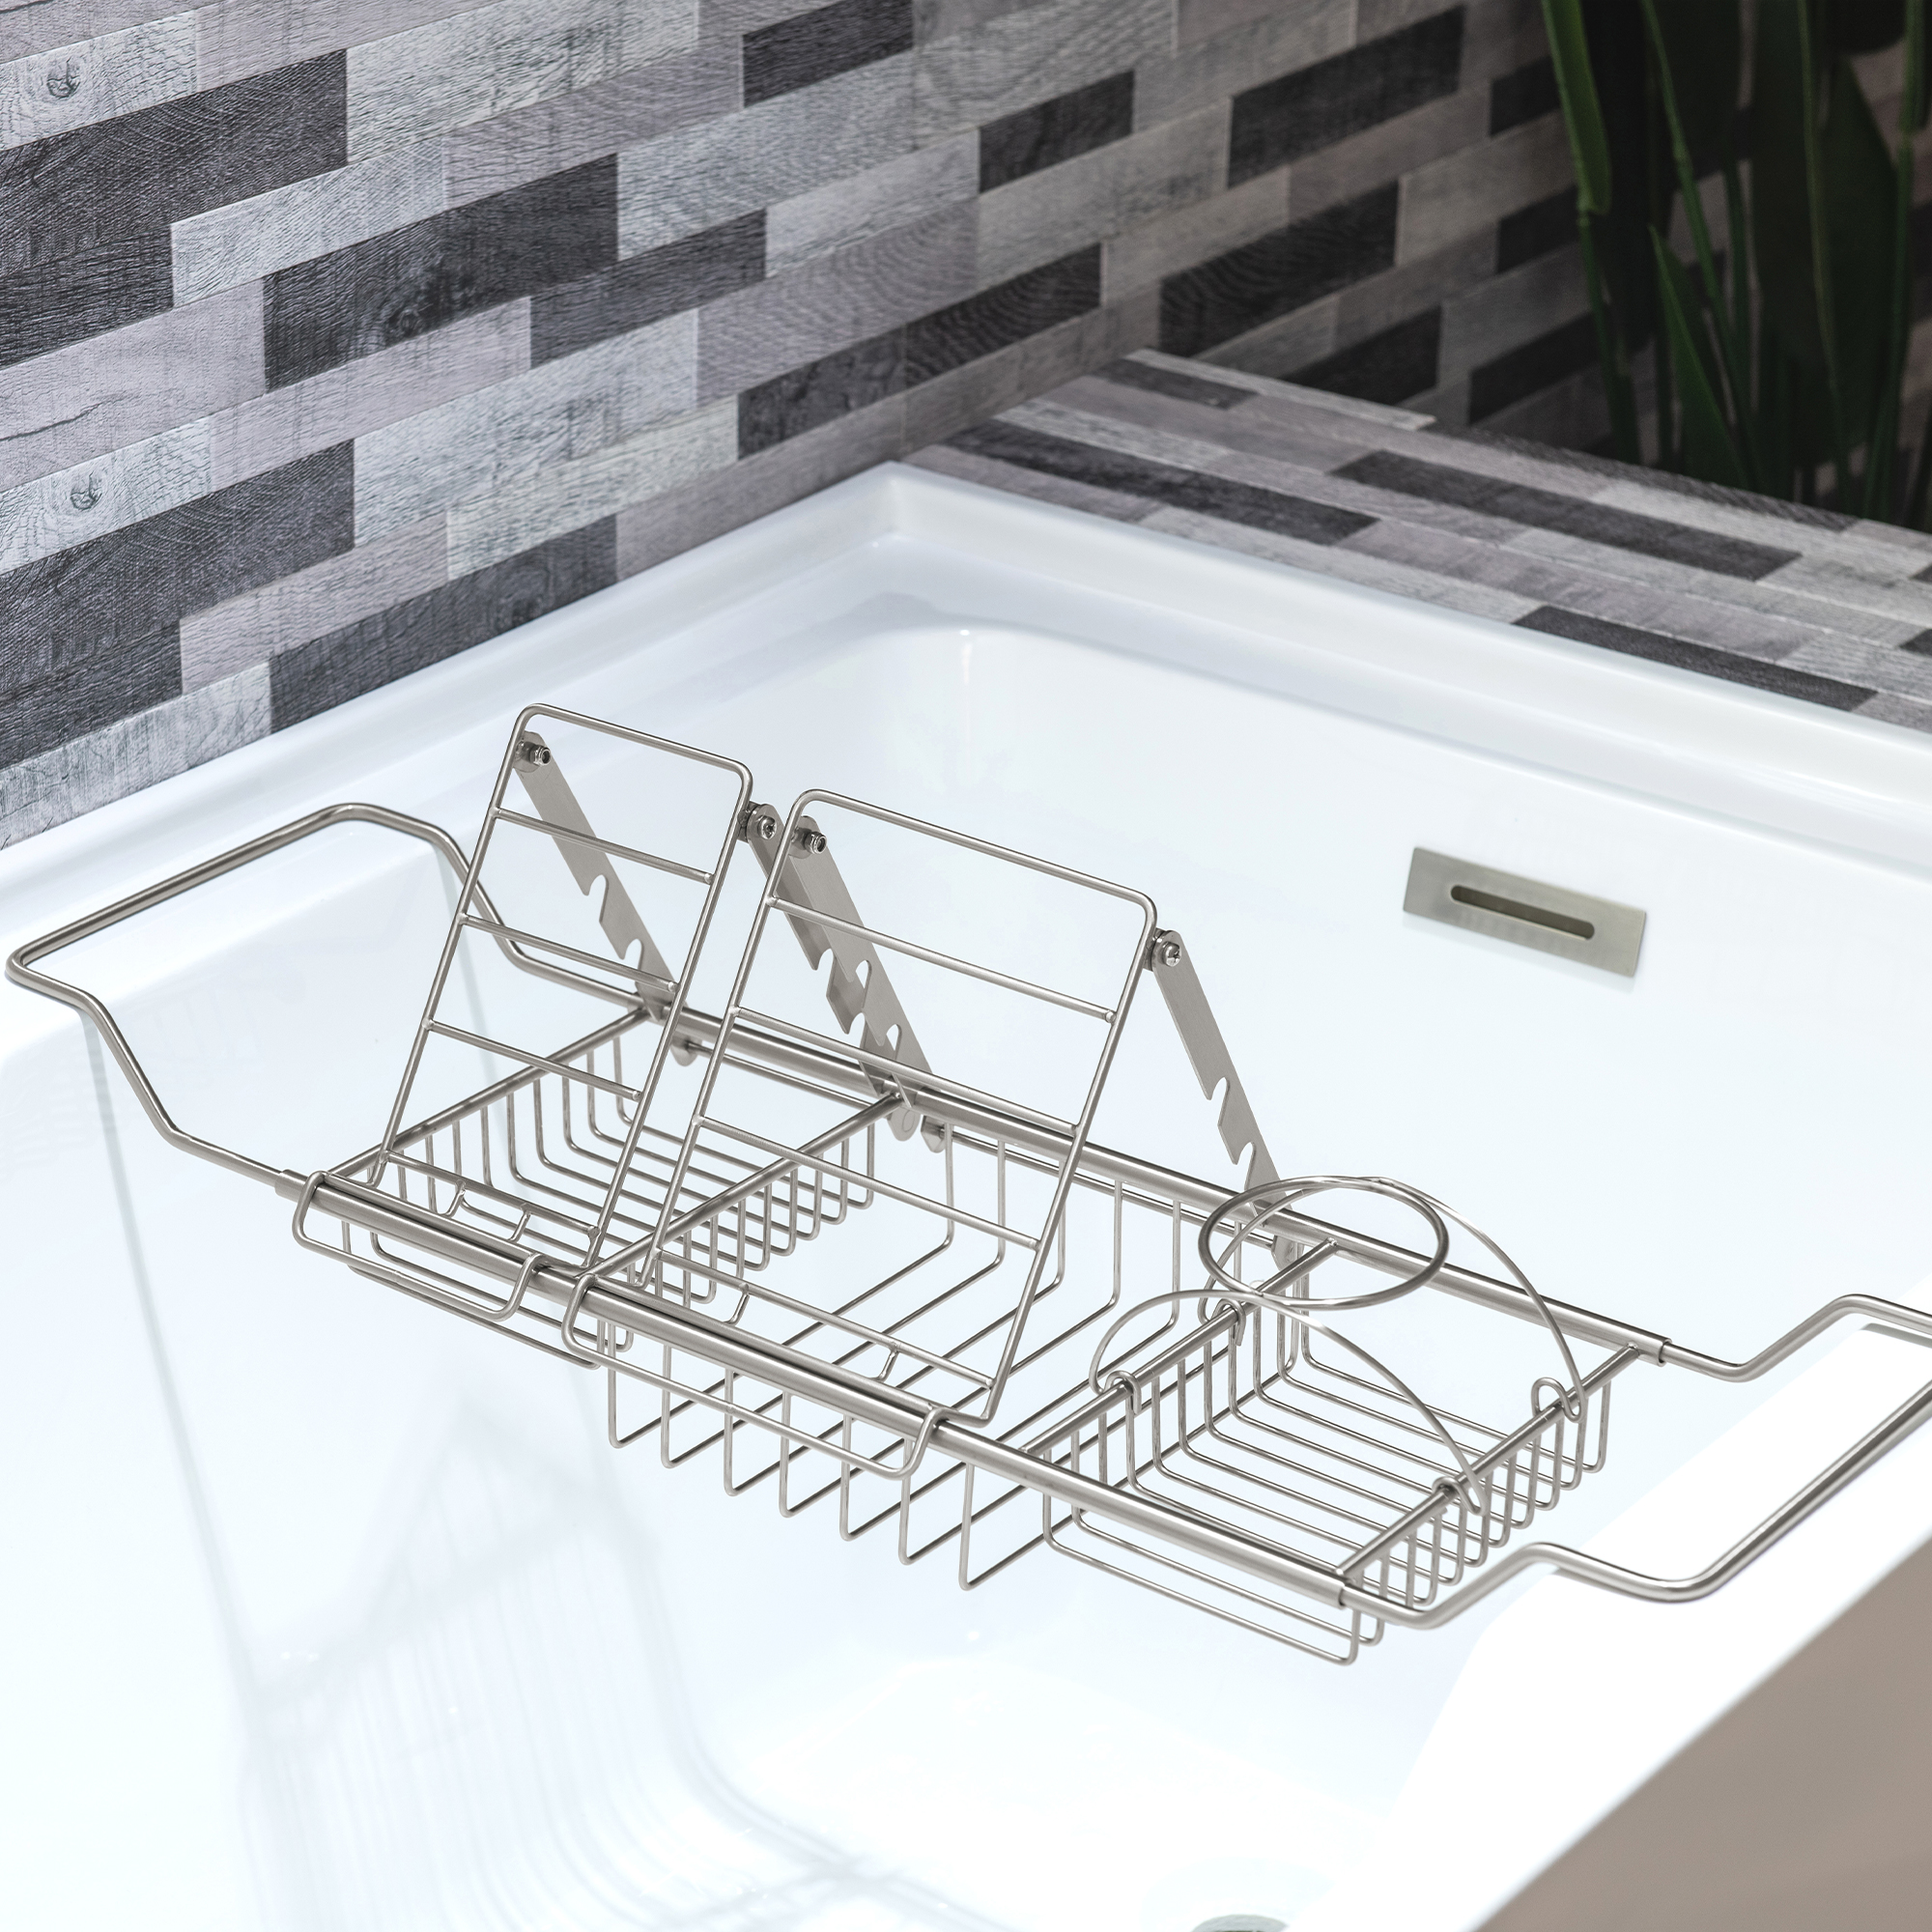  WOODBRIDGE Stainless Steel Extendable Bathtub Caddy Tray in Brushed Nickel Finish with Removable Wine Holder, Book and Phone Rack, Bathcad-BN_14305